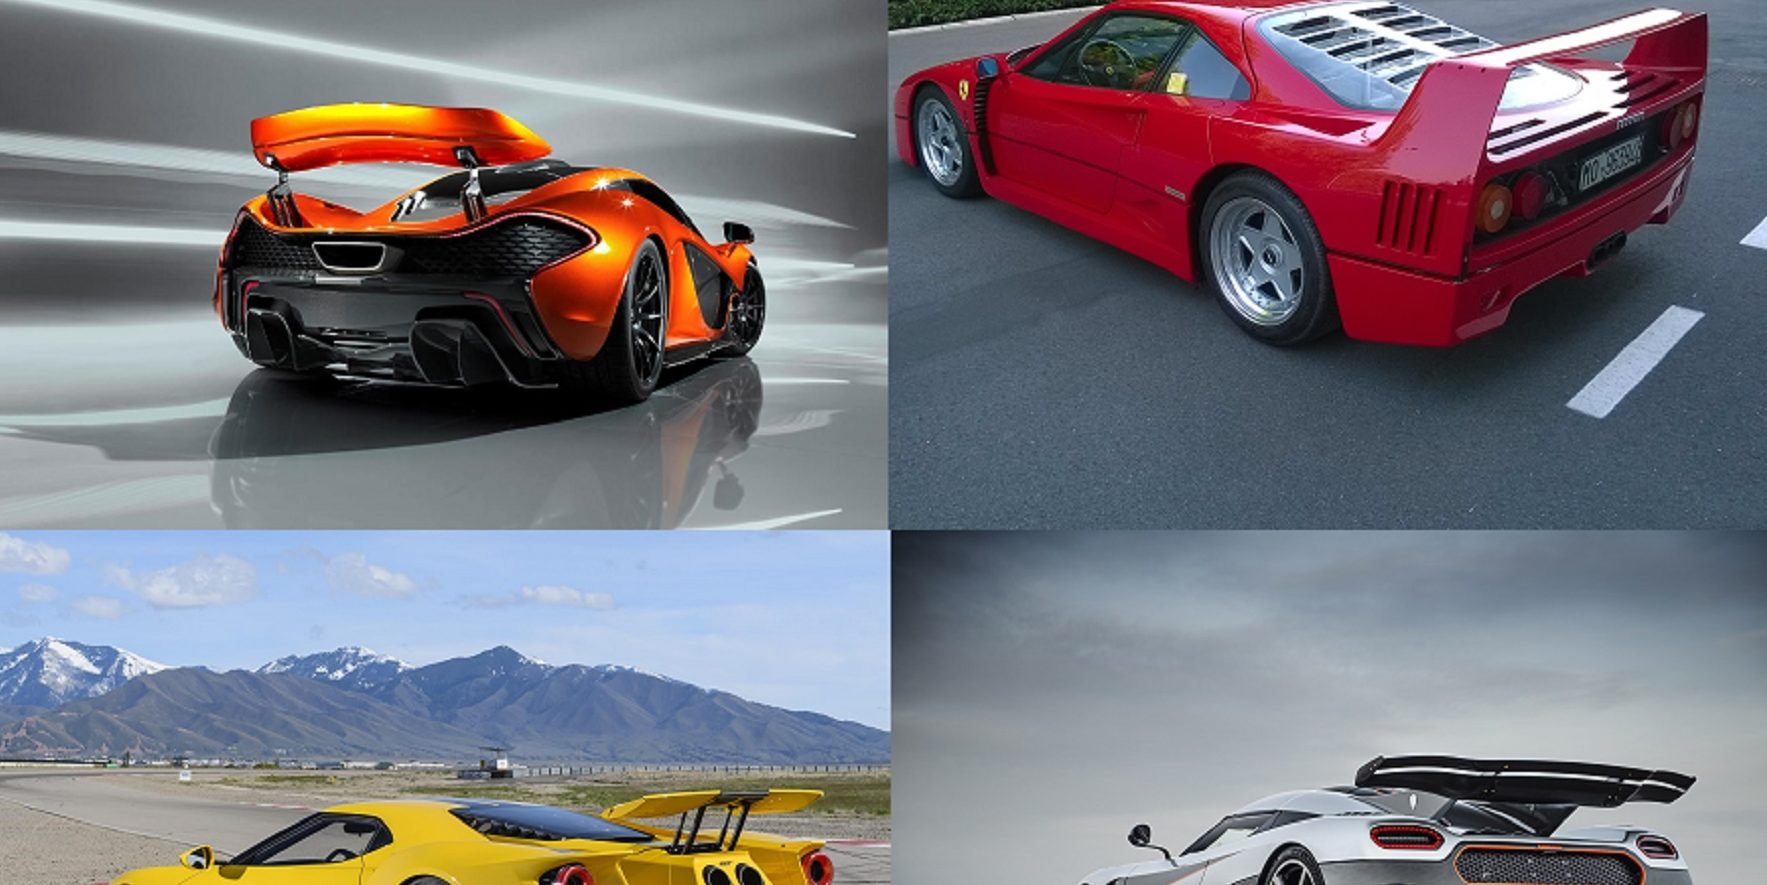 Spoiler alert: The biggest wings in the business - Read Cars